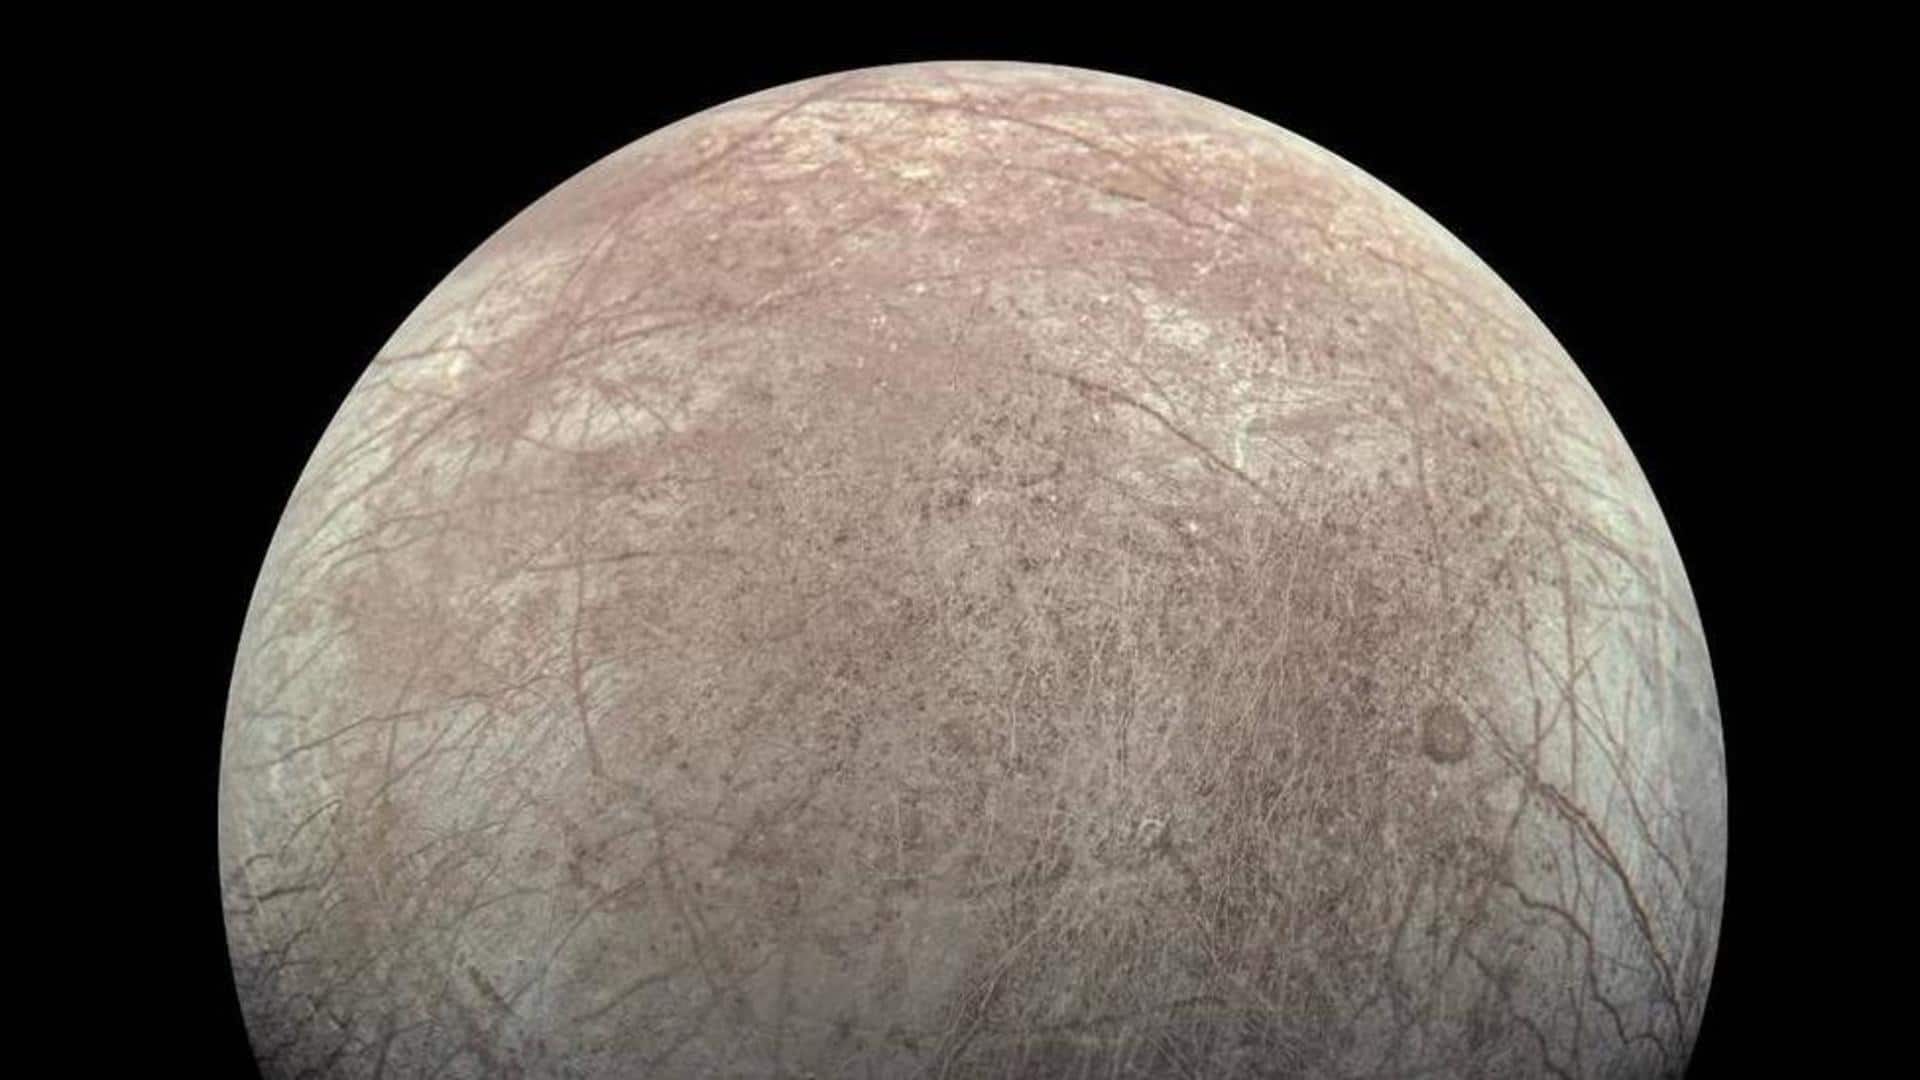 Why Jovian moon Europa's shell rotates differently than its interior